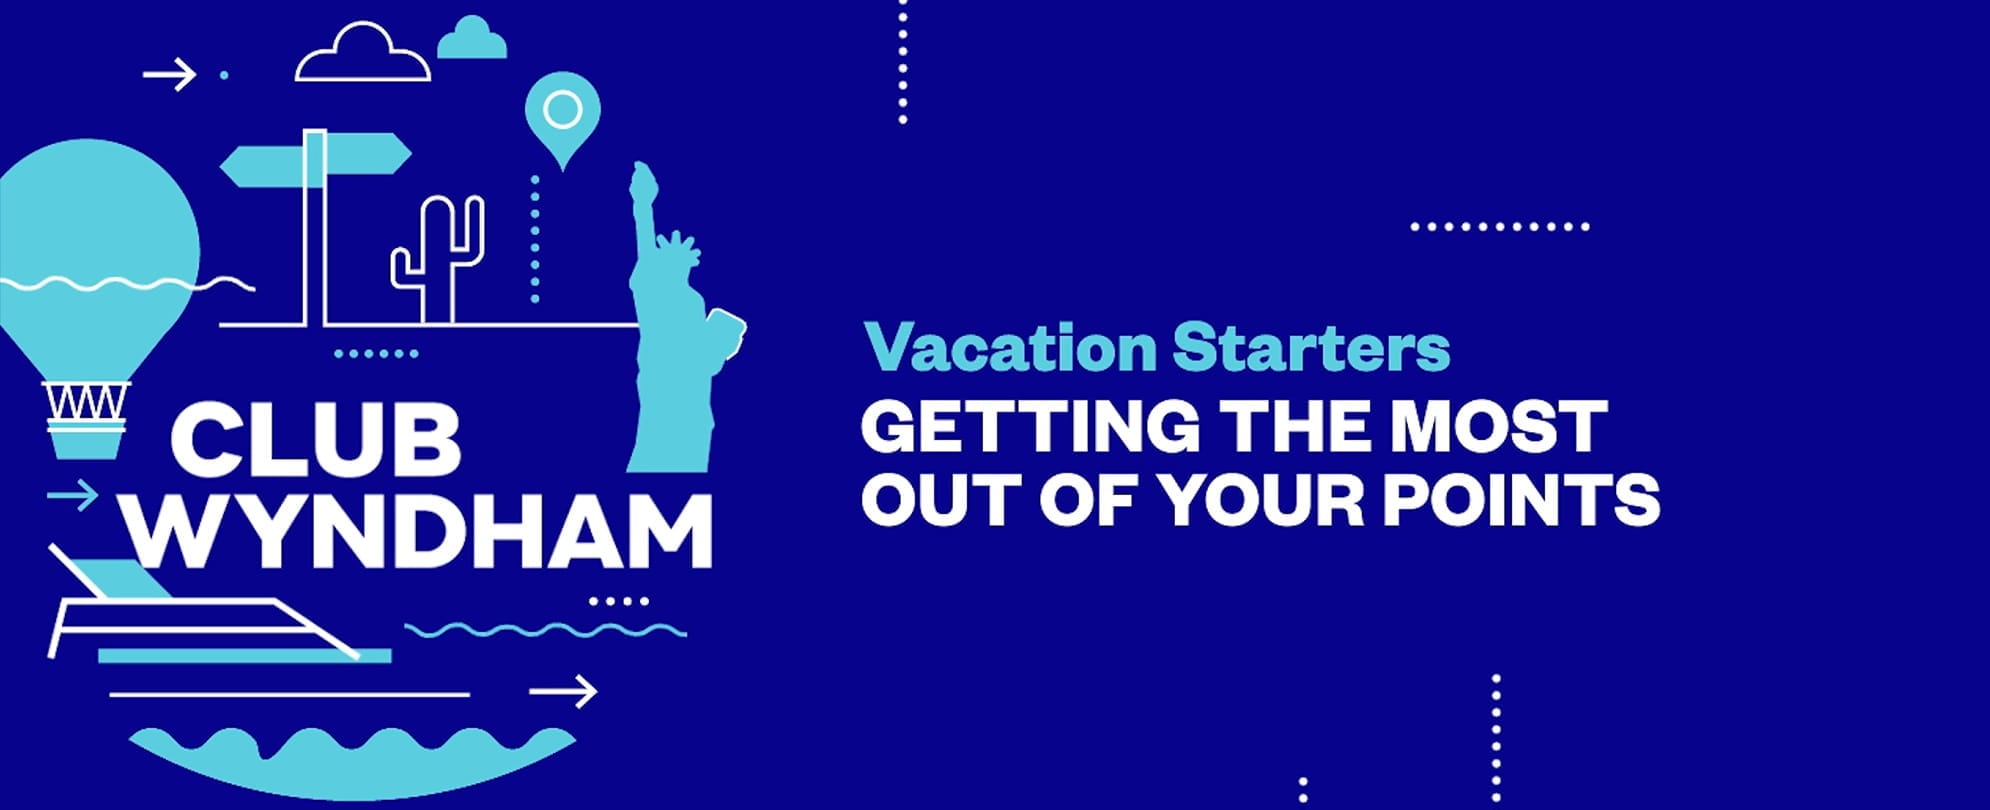 Getting The Most Out of Your Points overview from the Club Wyndham Vacation Starters video series